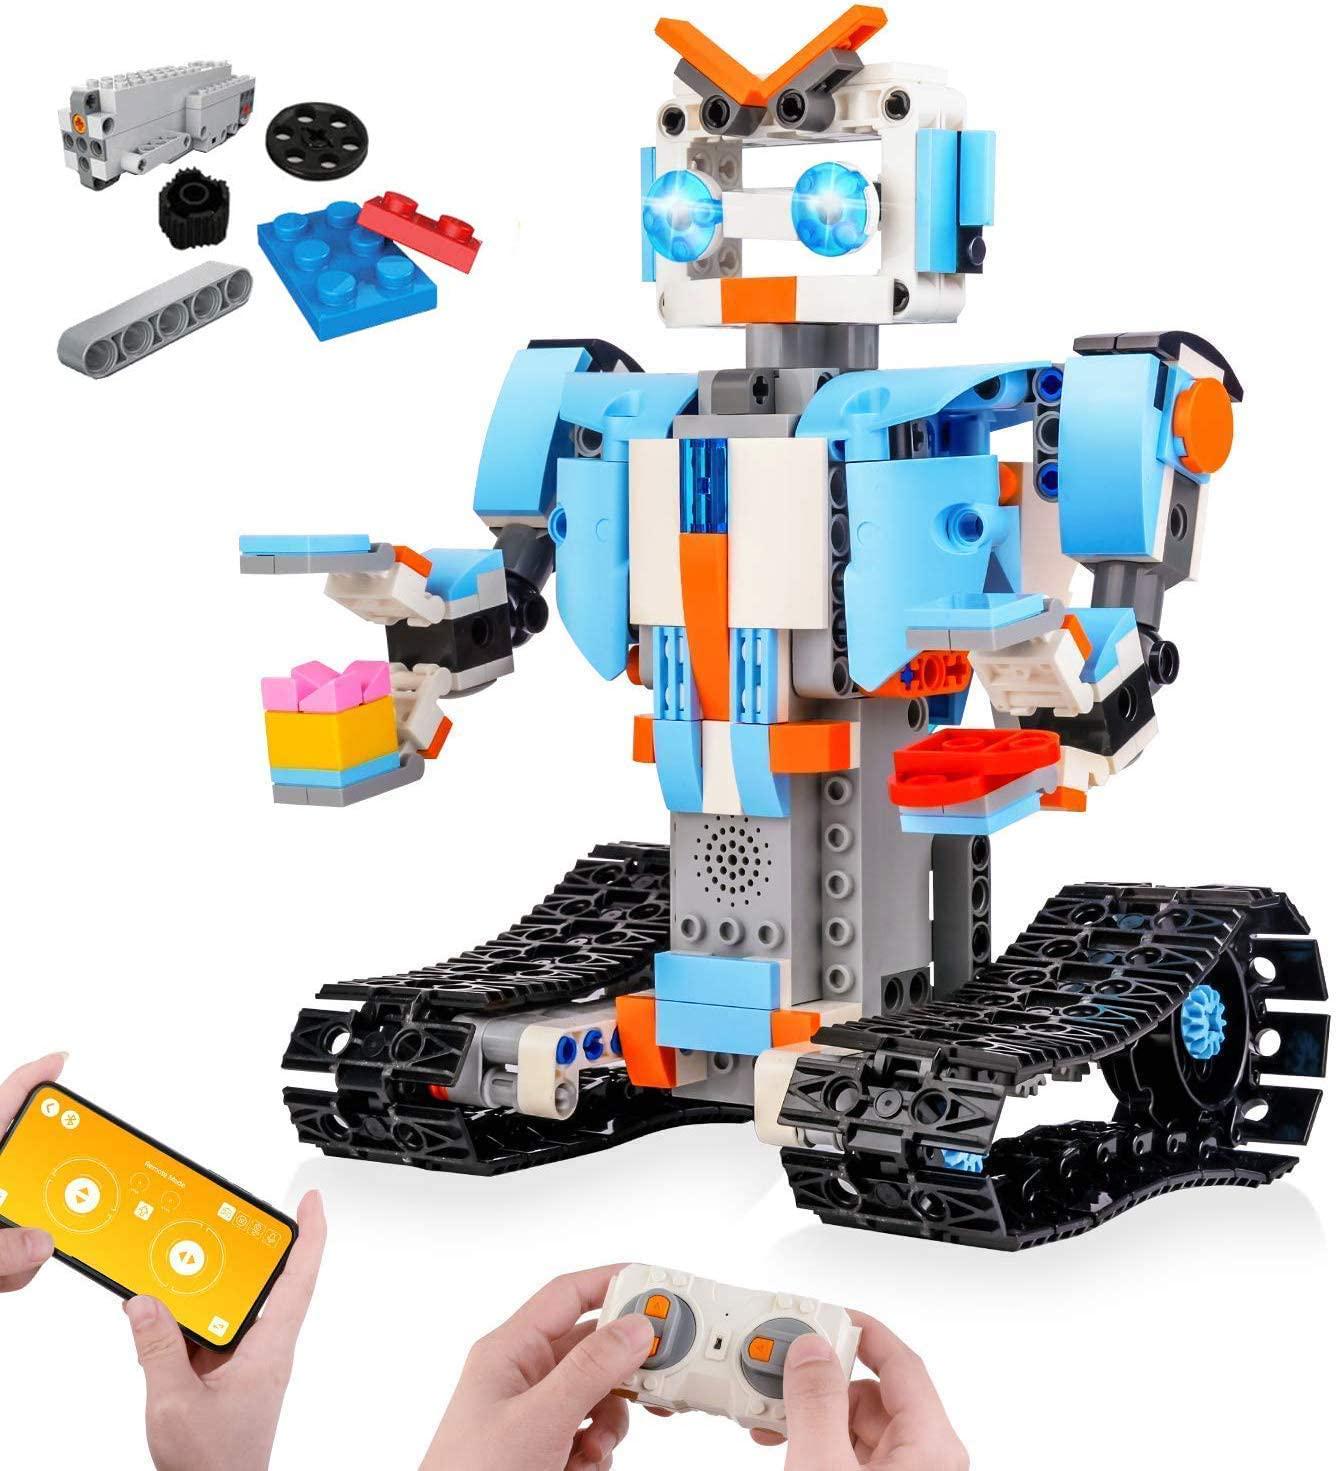 M&Ostyle, M&Ostyle Robot Science Kits STEM Remote Control Building Blocks Robot for Kids Remote Control Engineering Science Educational Building Toys Kits for Boys and Girls Electric RC Robot DIY T(Blue/351PCS)